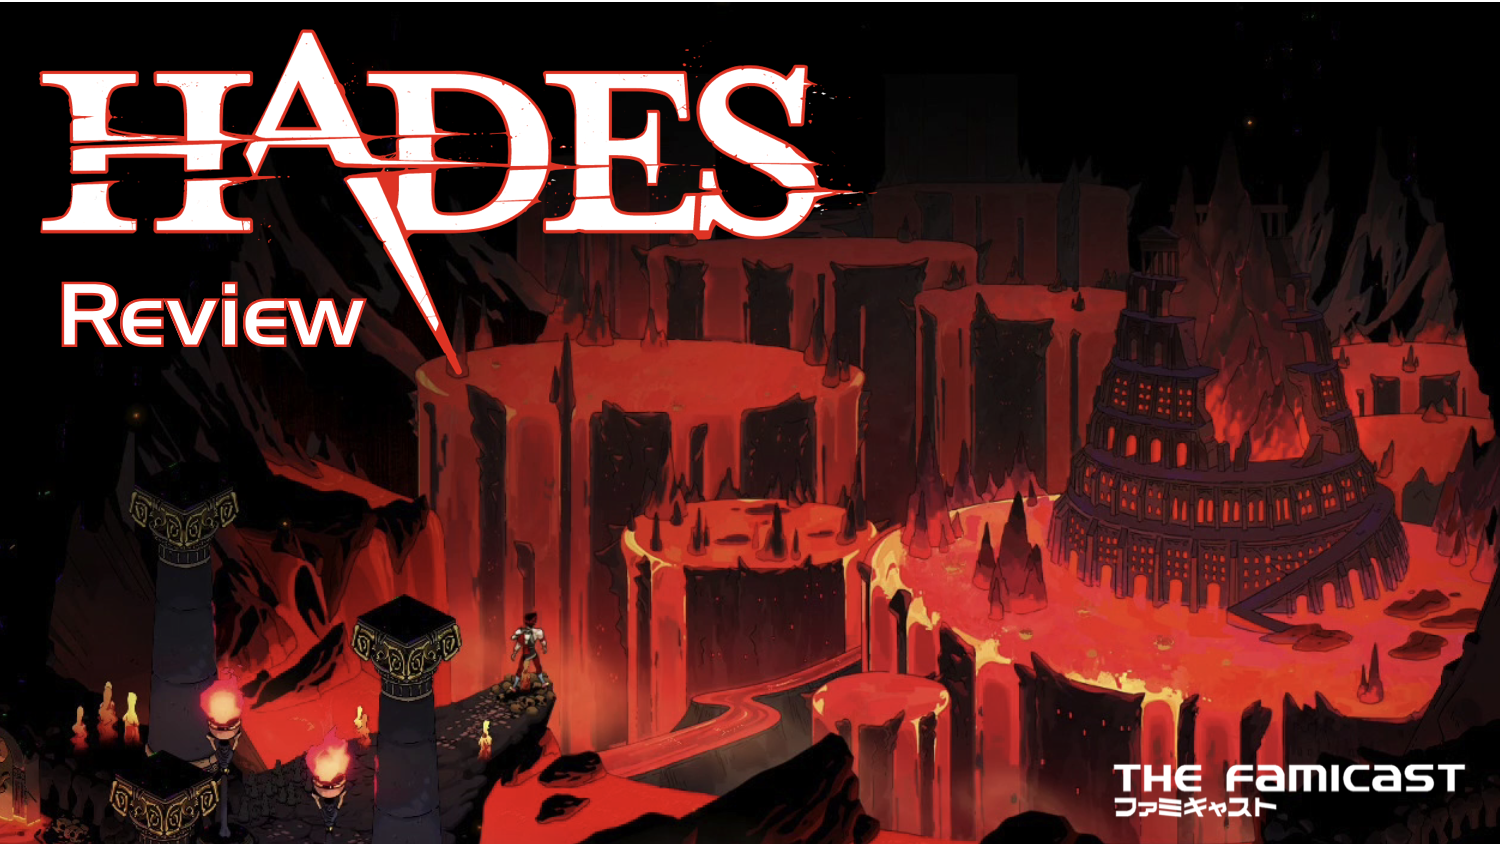 Hades | Review | Switch